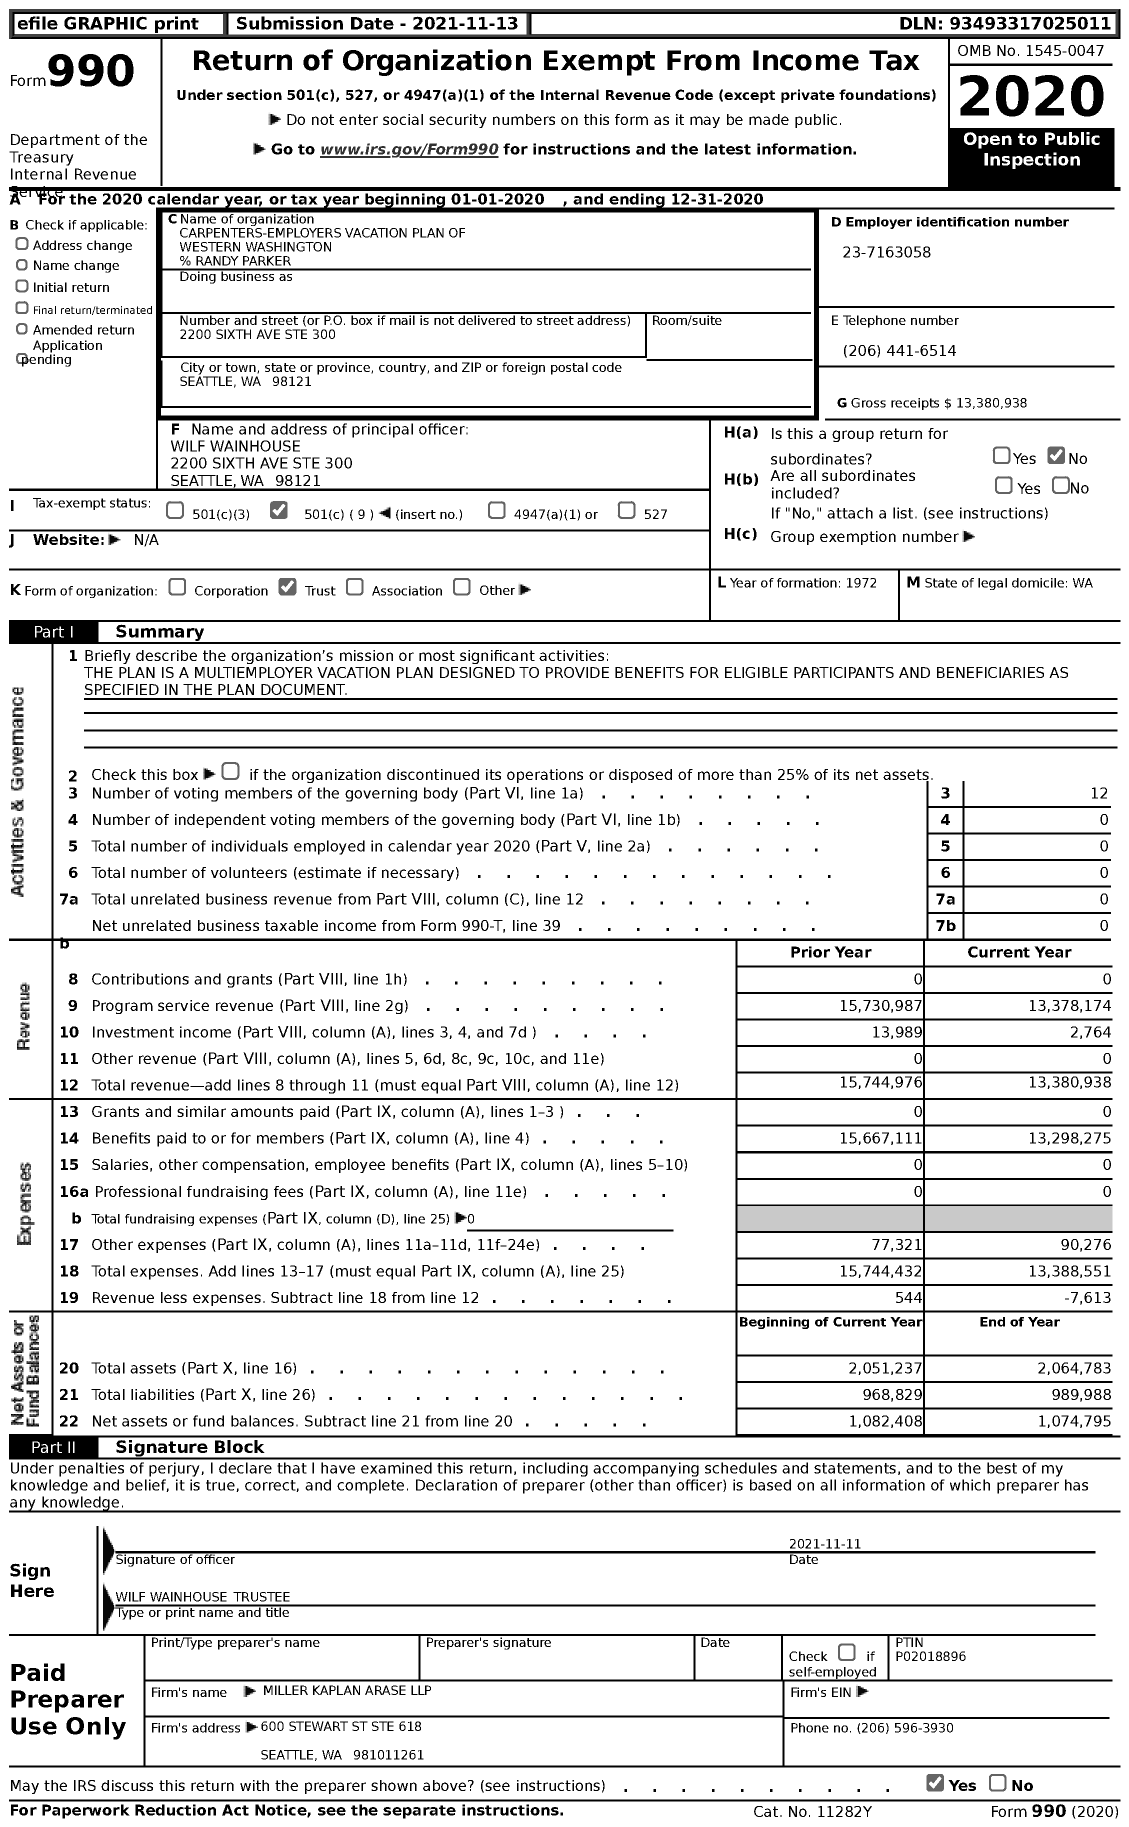 Image of first page of 2020 Form 990 for Northwest Carpenters Vacation Plan